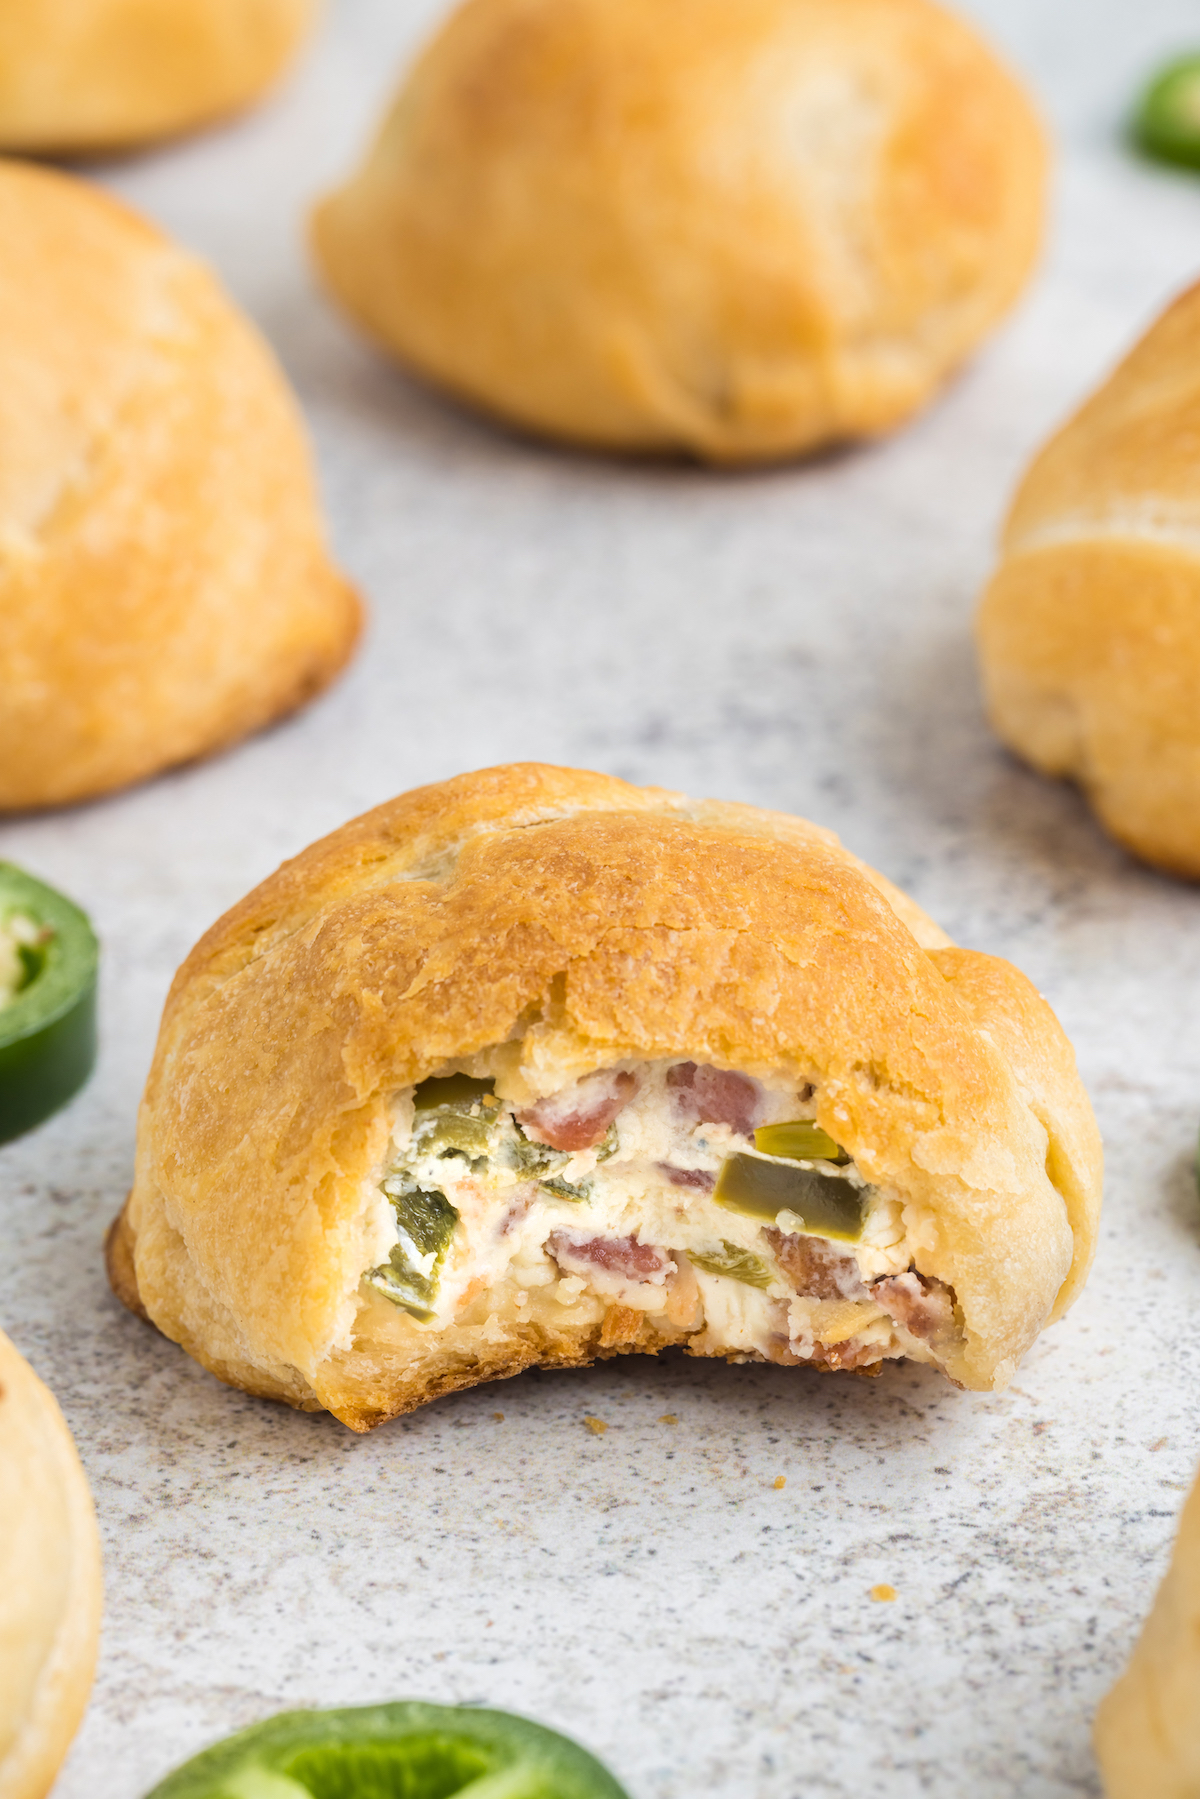 jalapeno popper with bite taken to reveal the cream cheese filling inside